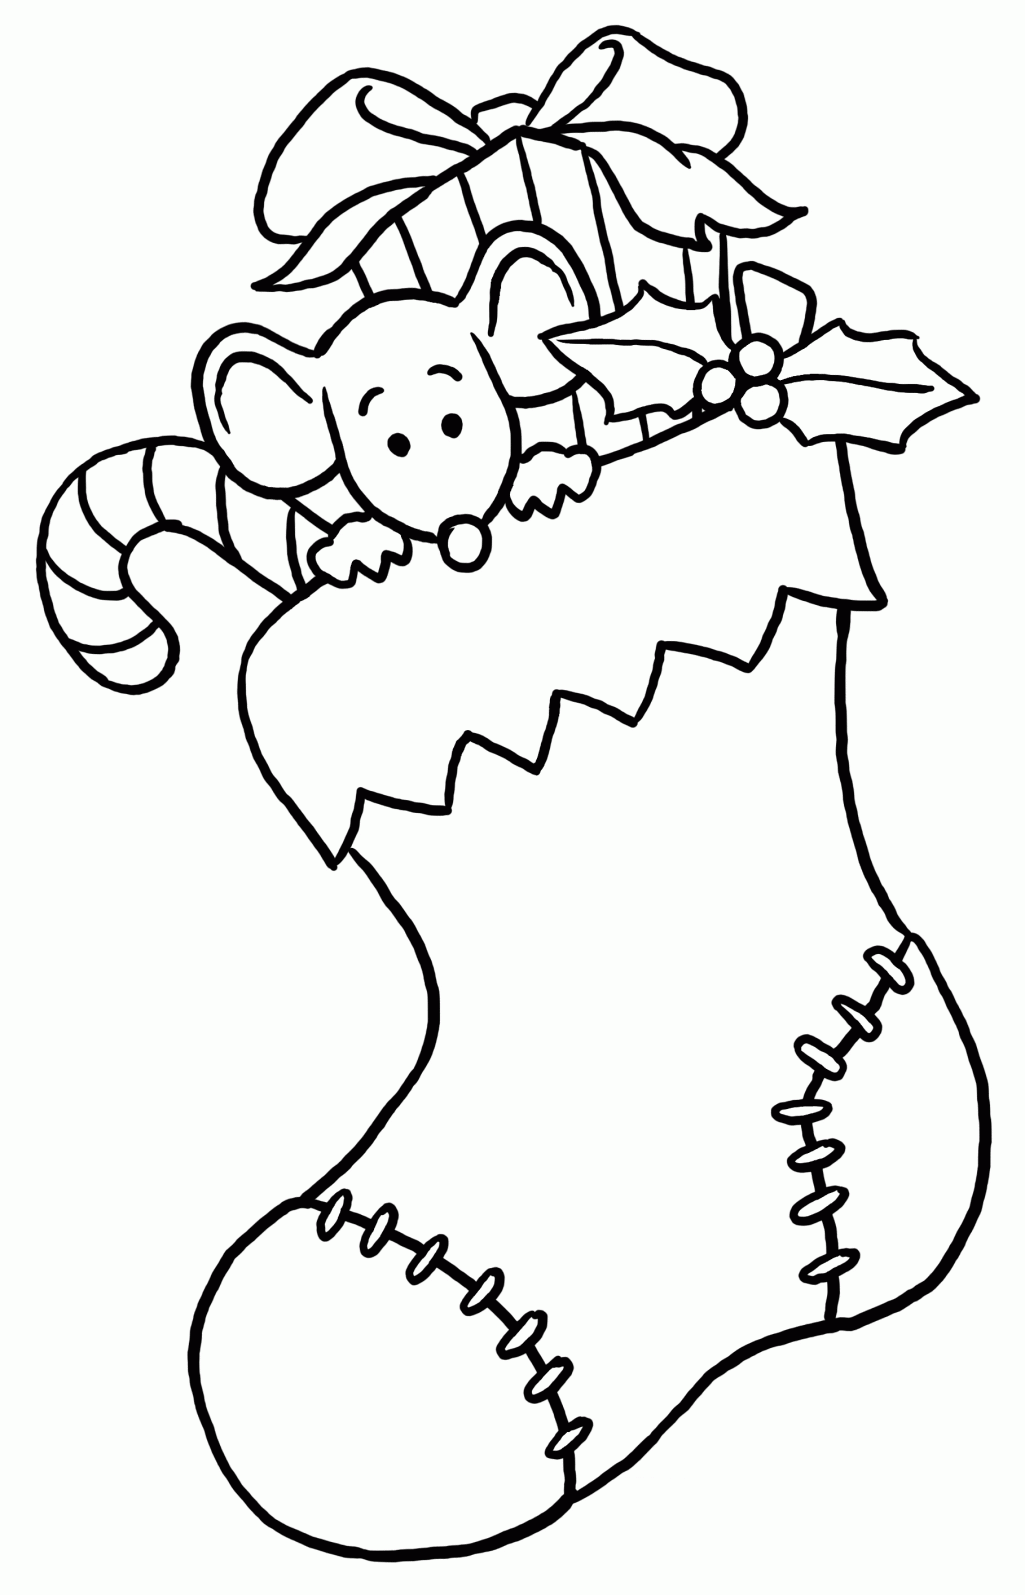 Happy Holidays Coloring Pages Printable - Coloring Home